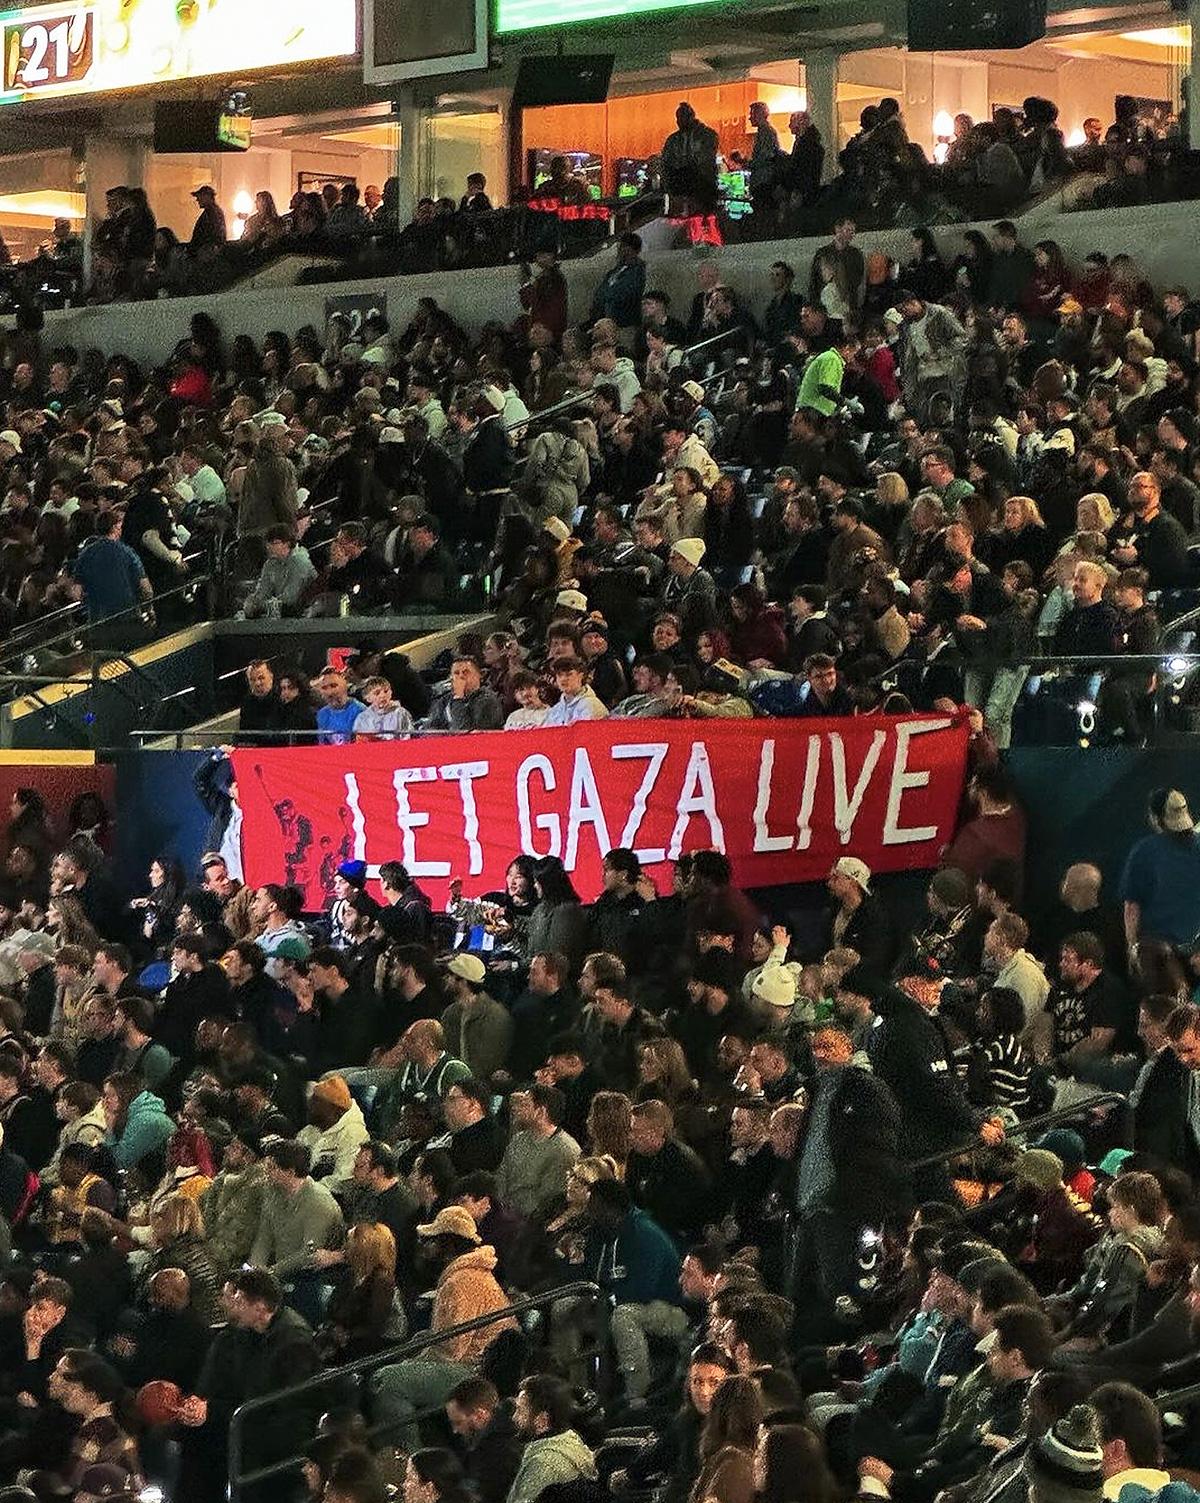 Athletes for Ceasefire raised a banner during the NBA All-Star weekend in Indianapolis.